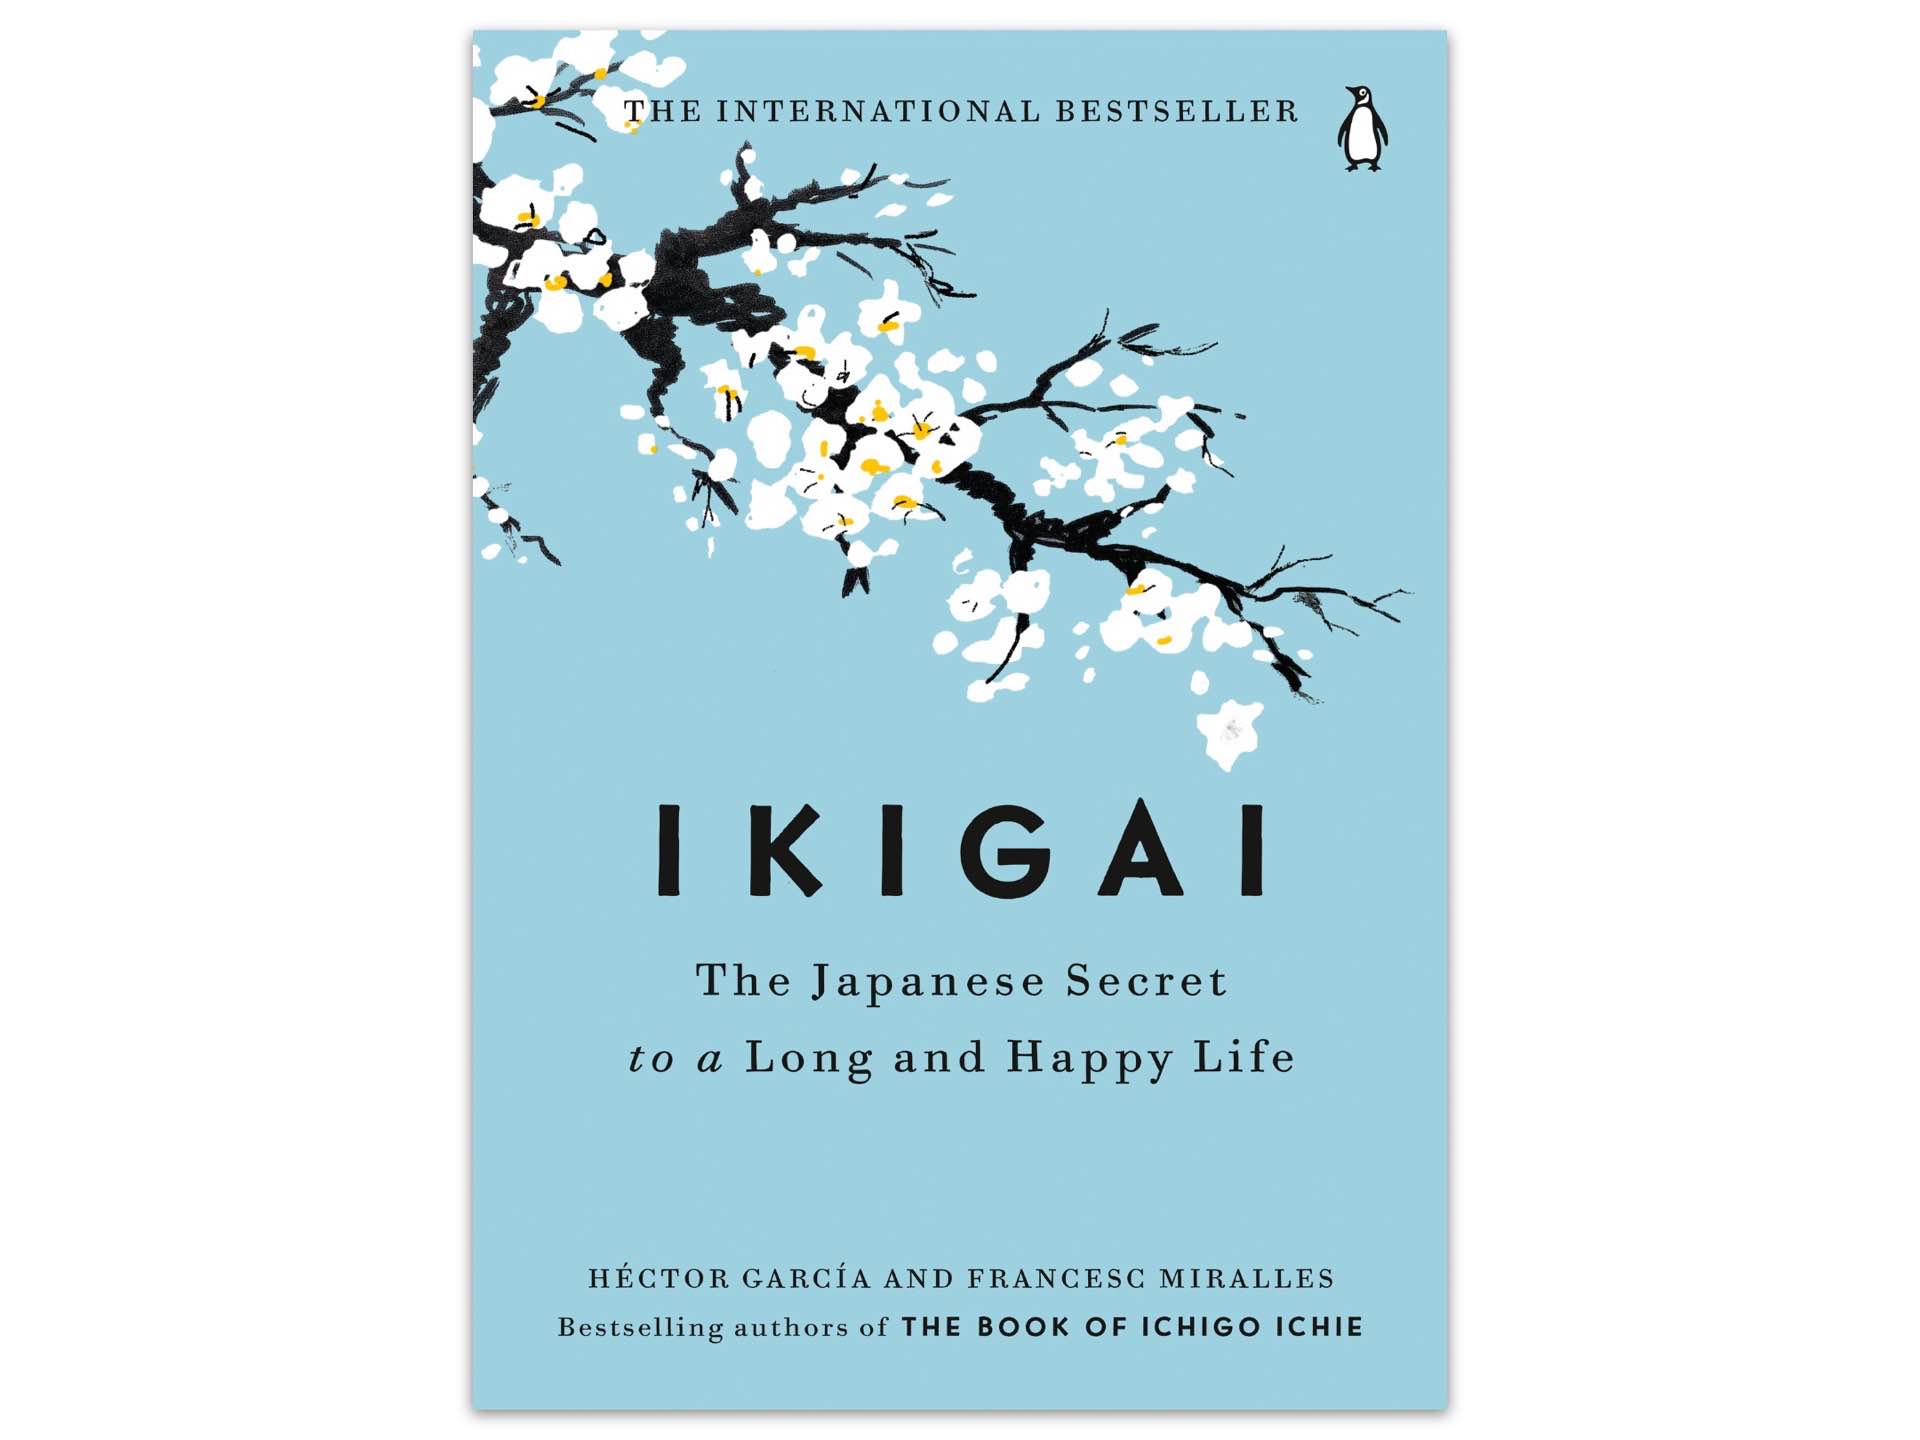 Ikigai: The Japanese Secret to a Long and Happy Life by Héctor García and Francesc Miralles. ($13 hardcover)